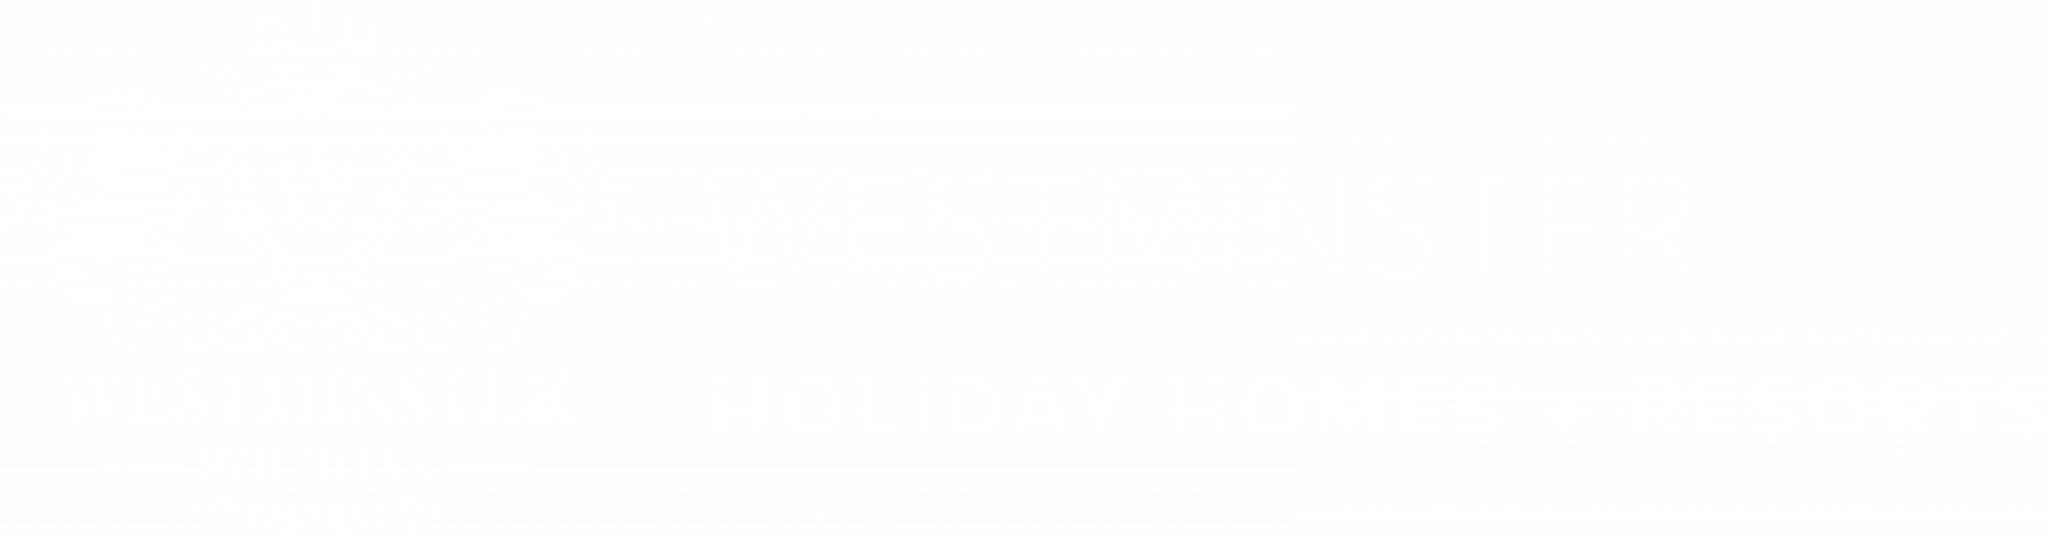 Westminster Hotels + Resorts + Holiday homes